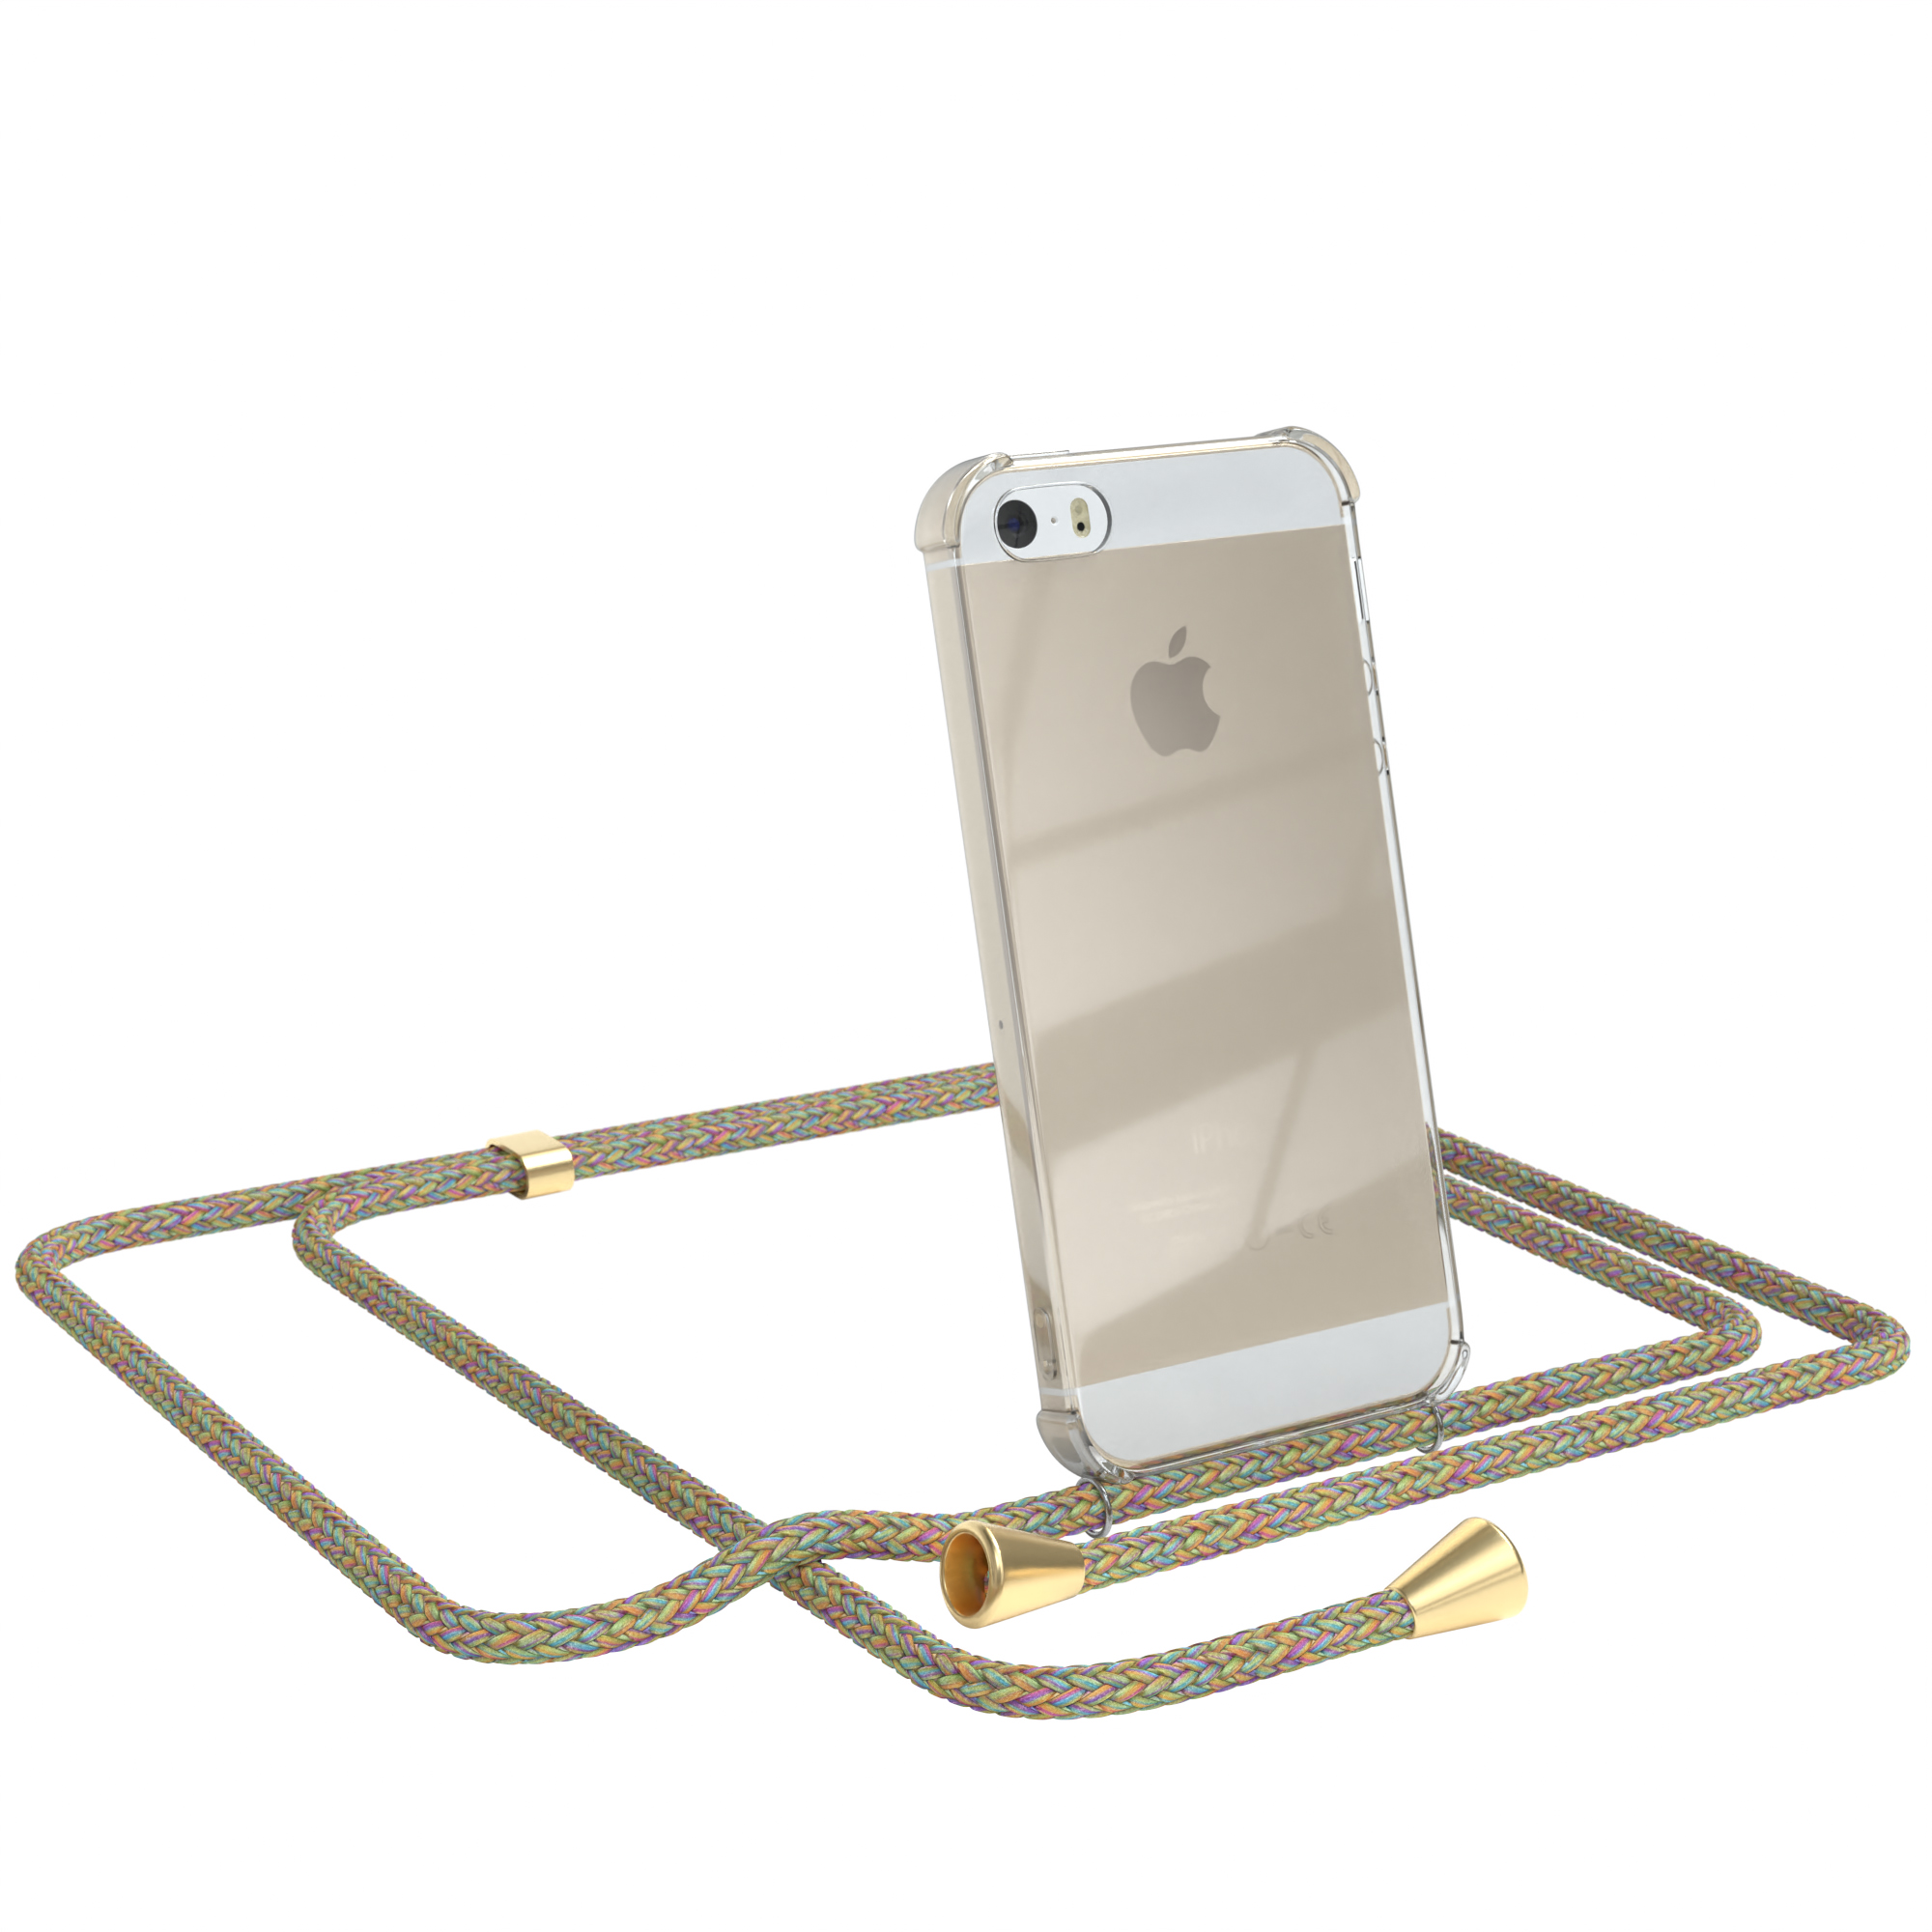 EAZY CASE Umhängetasche, Cover Umhängeband, iPhone Clips 2016, / 5S, Gold Apple, mit iPhone Clear SE Bunt 5 